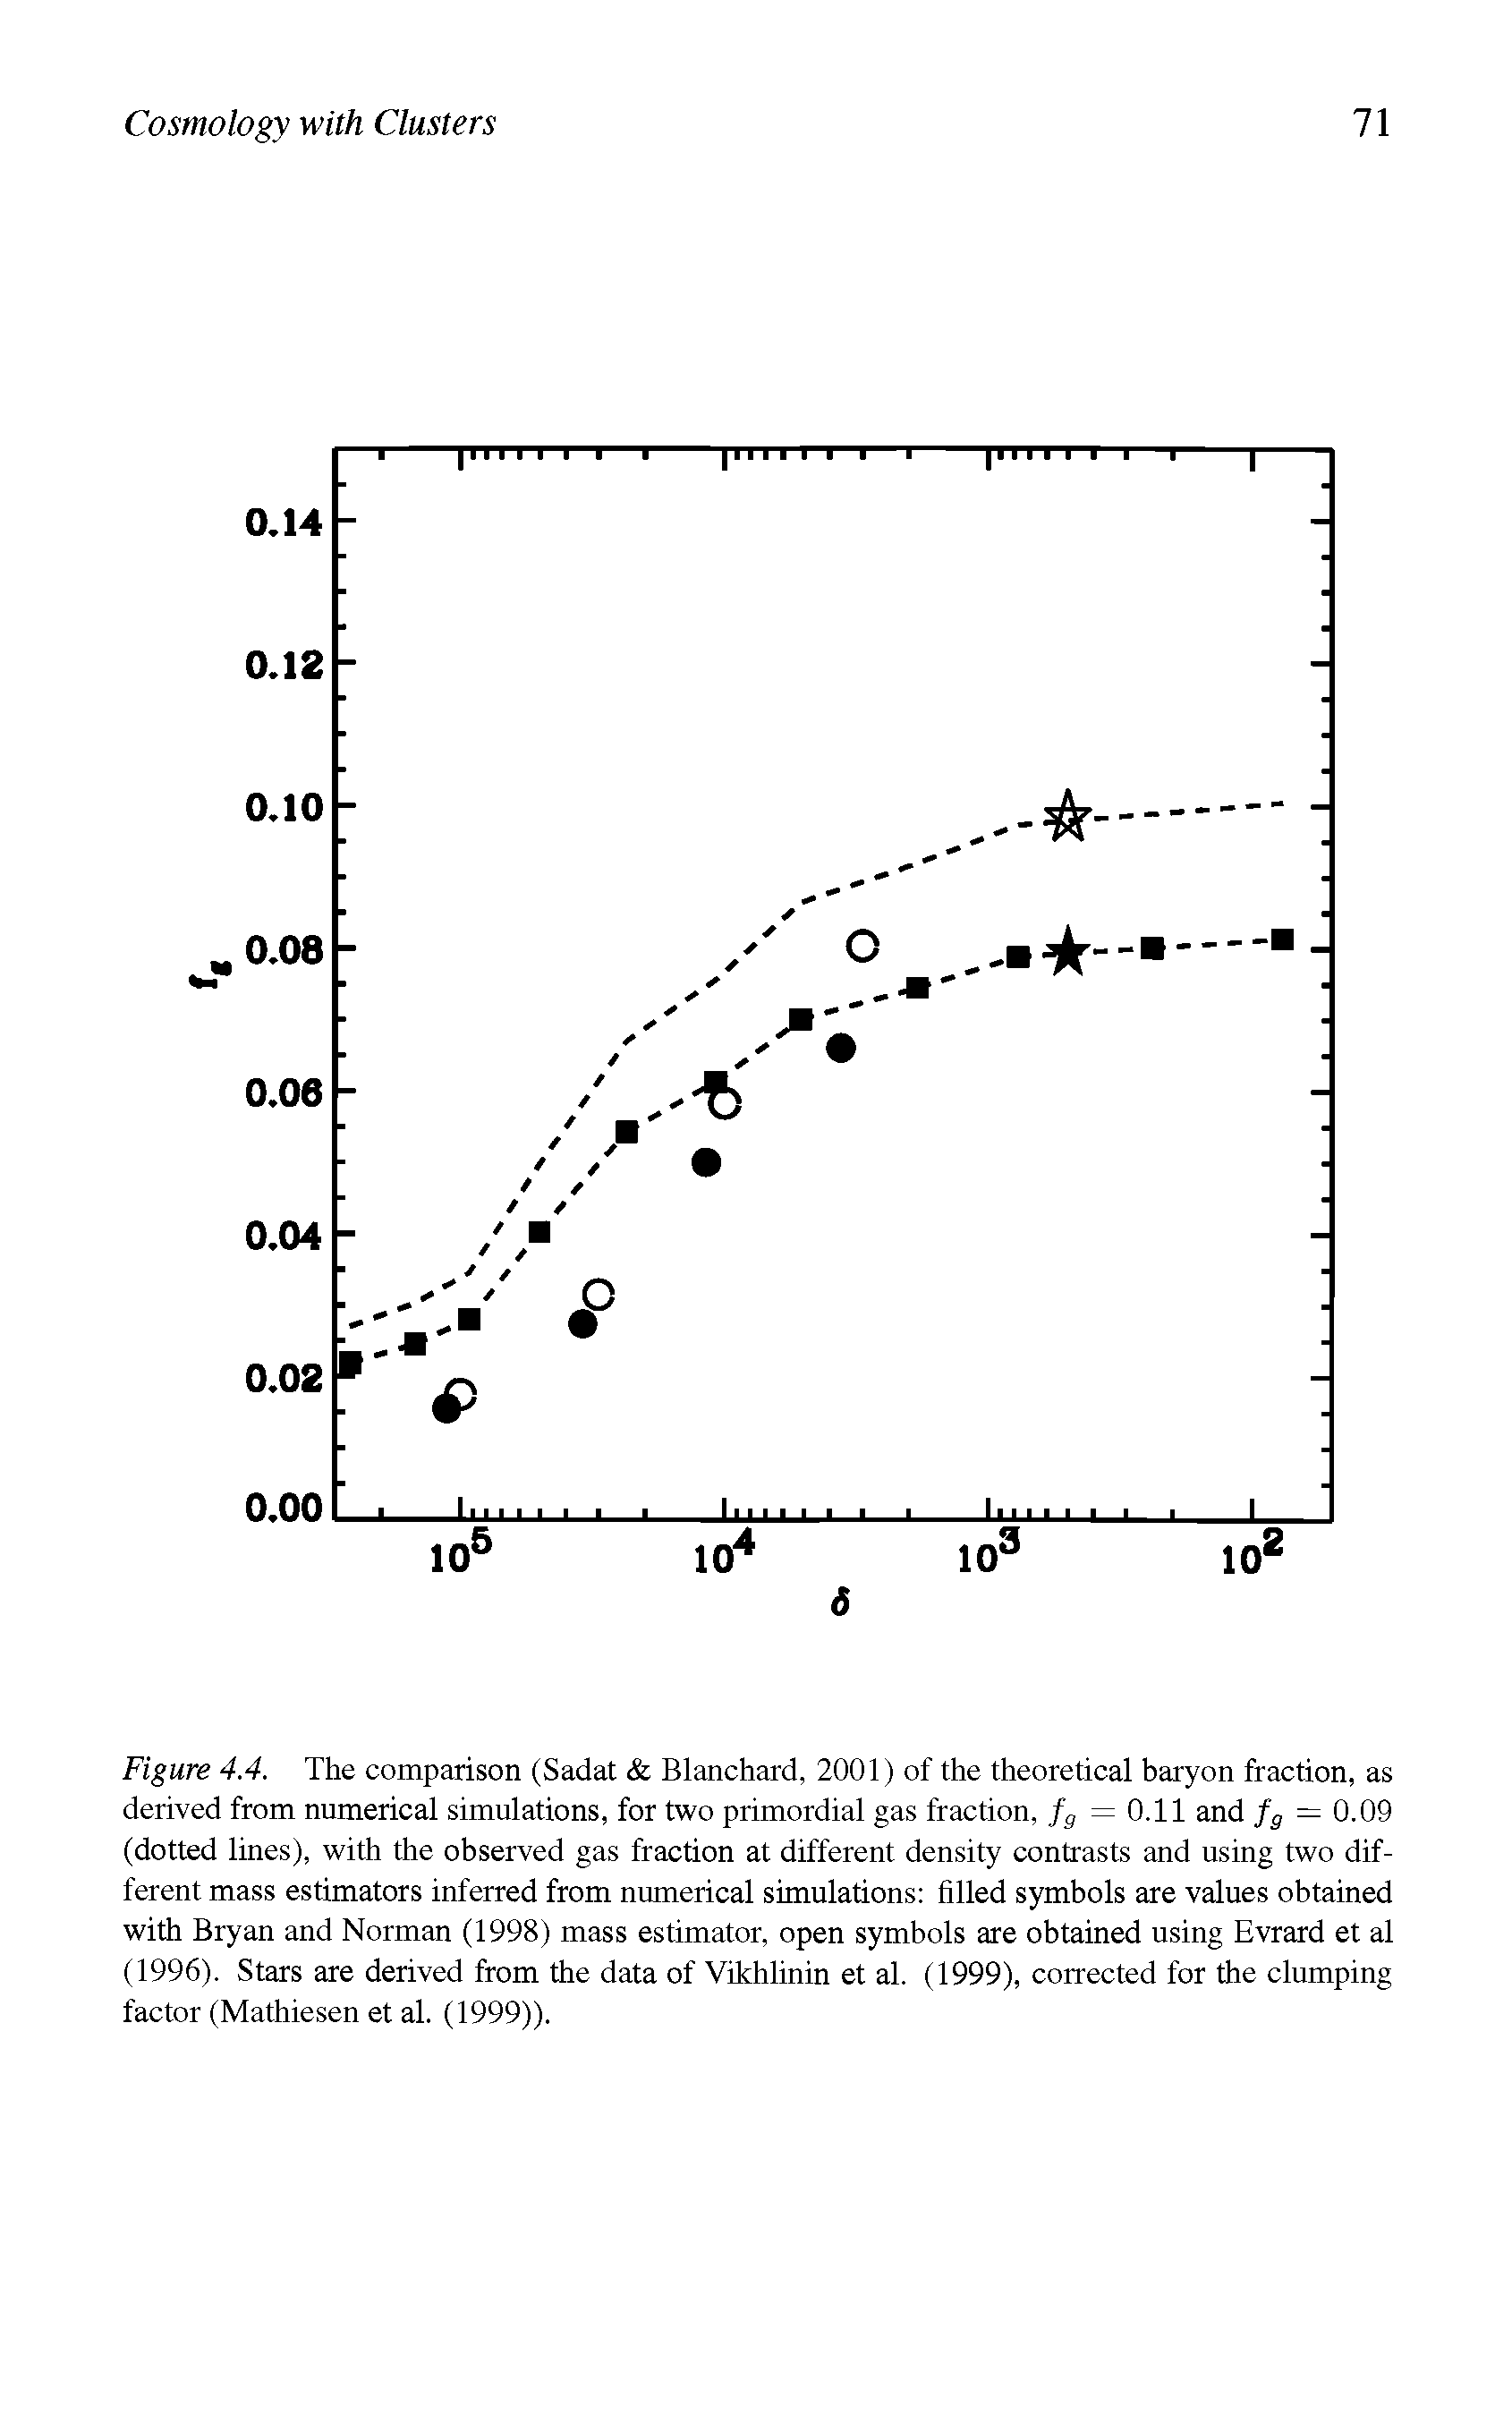 Figure 4.4. The comparison (Sadat Blanchard, 2001) of the theoretical baryon fraction, as derived from numerical simulations, for two primordial gas fraction, fg =0.11 and fg = 0.09 (dotted lines), with the observed gas fraction at different density contrasts and using two different mass estimators inferred from numerical simulations filled symbols are values obtained with Bryan and Norman (1998) mass estimator, open symbols are obtained using Evrard et al (1996). Stars are derived from the data of Vikhlinin et al. (1999), corrected for the clumping factor (Mathiesen et al. (1999)).